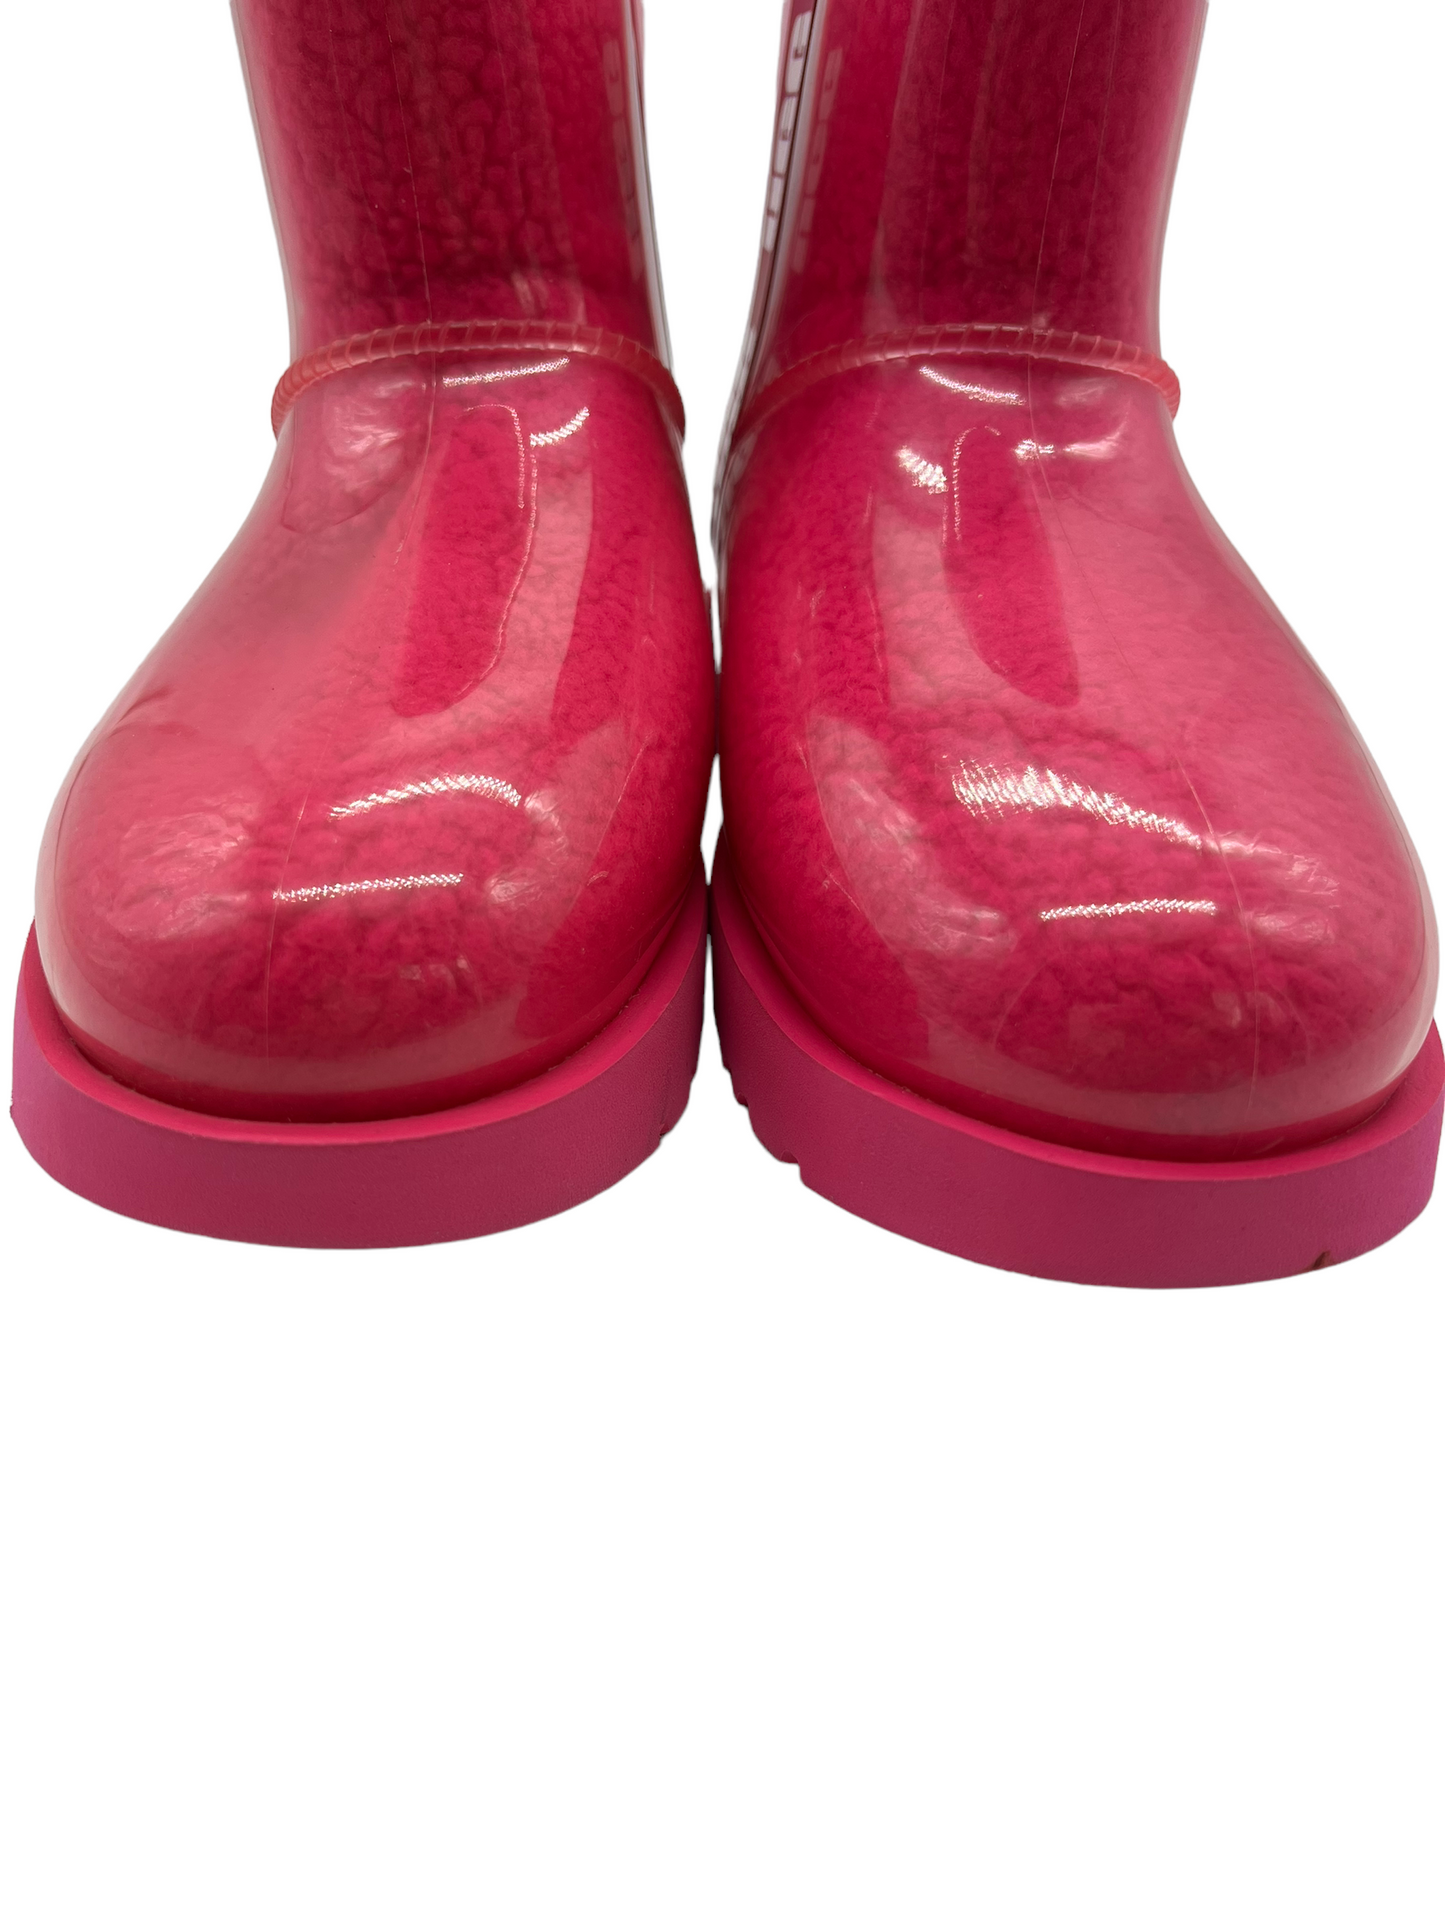 Ugg Classic Clear PVC Hibiscus Size 7 Mini Boots